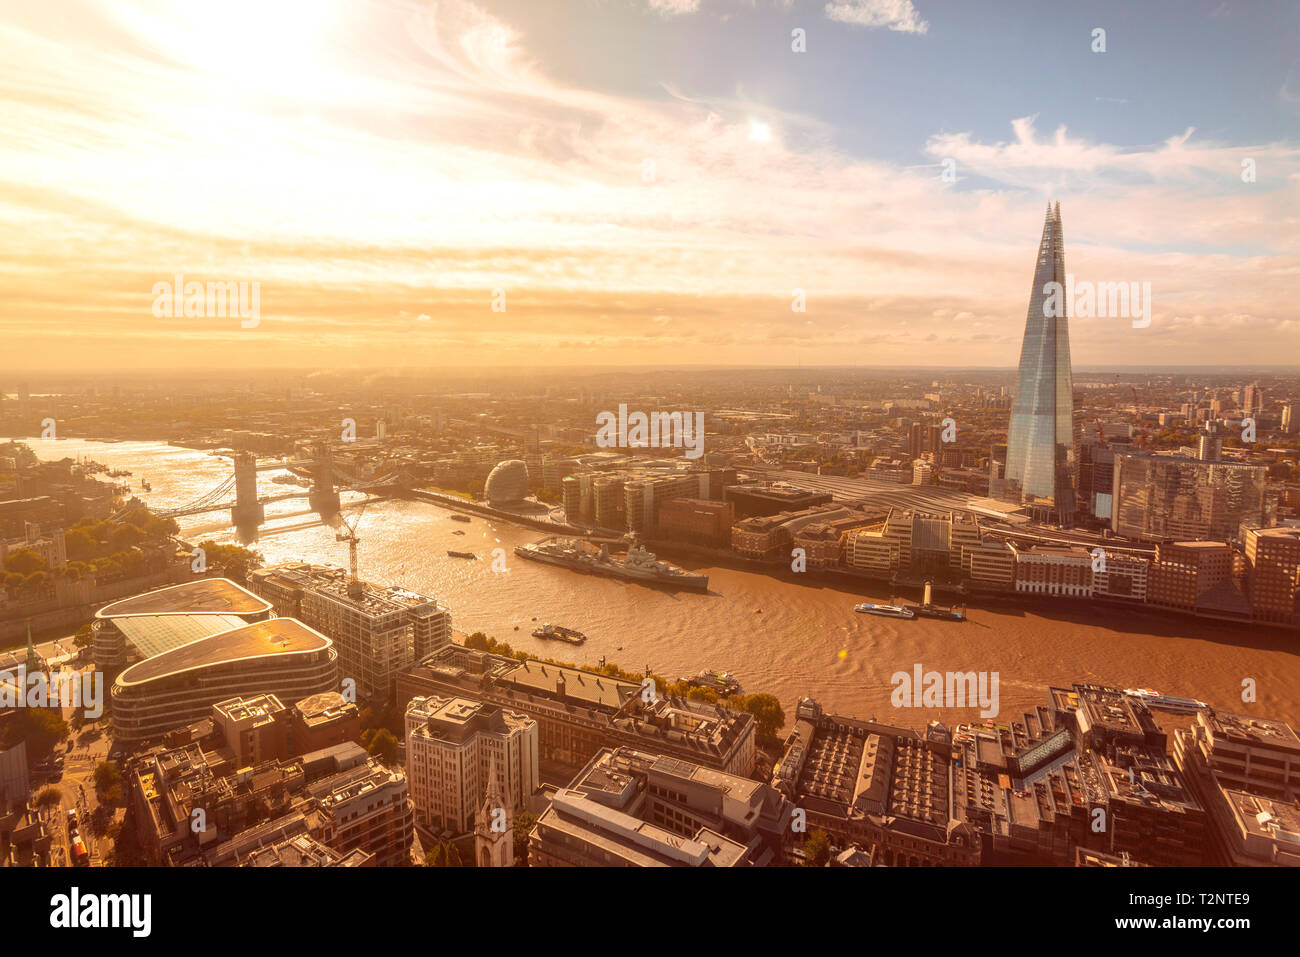 Sunny view of Thames river, Tower bridge, London tower and the Shard, City of London, UK Stock Photo